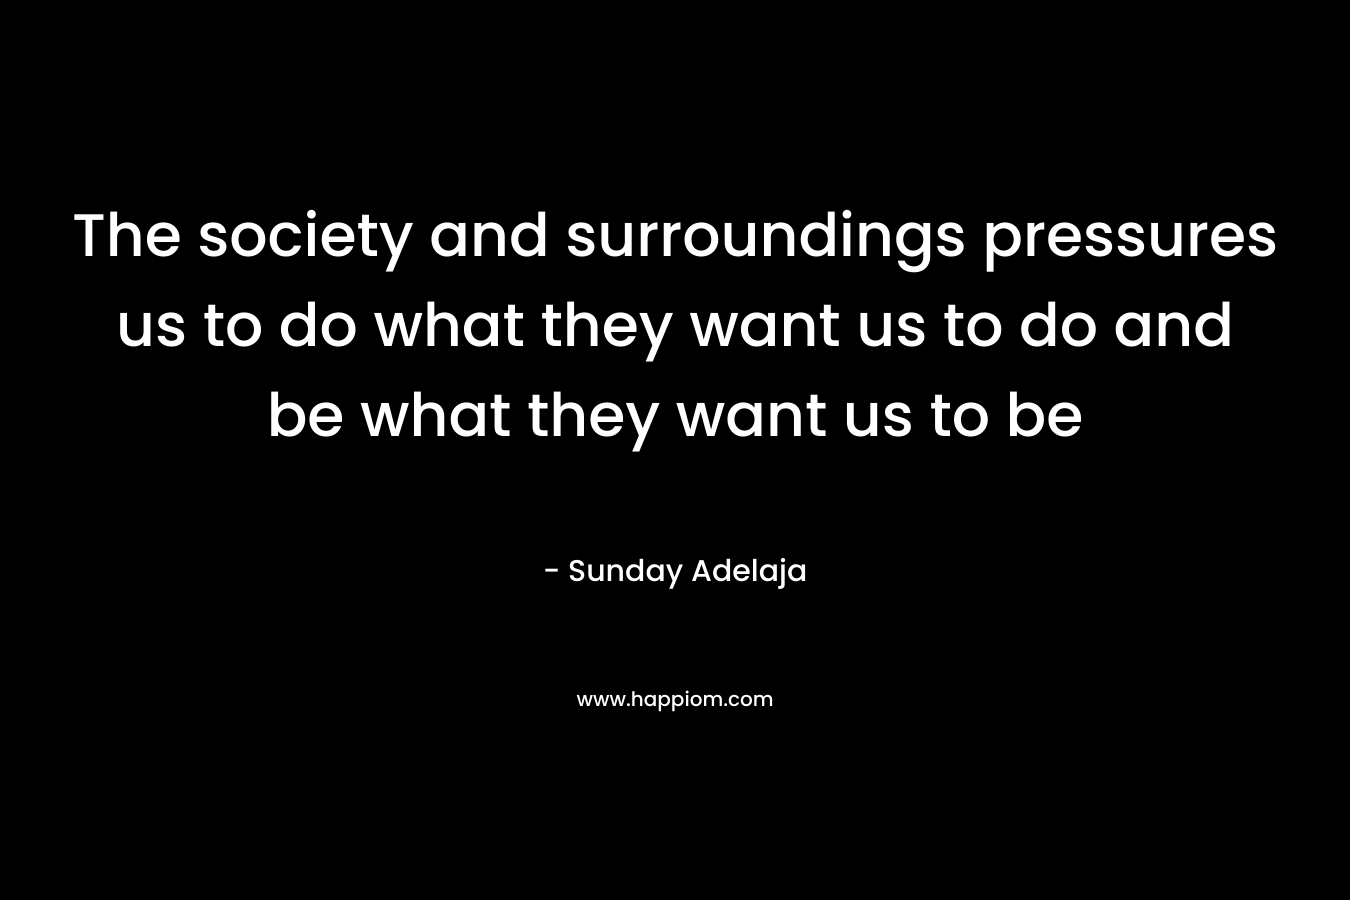 The society and surroundings pressures us to do what they want us to do and be what they want us to be